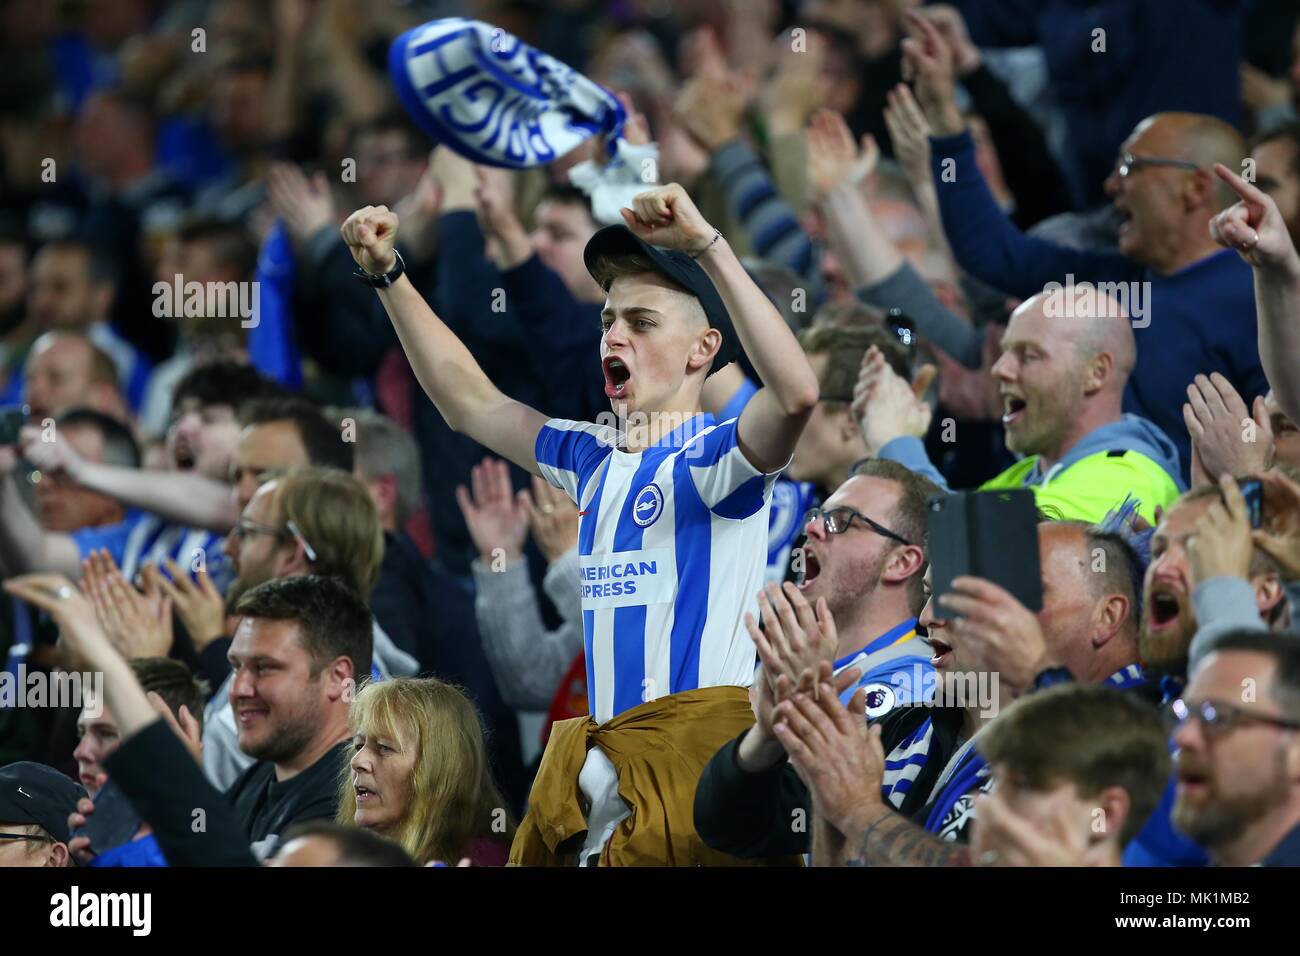 Brighton fans celebrate victory after  the Premier League match between Brighton and Hove Albion and Manchester United at the American Express Community Stadium in Brighton and Hove. 04 May 2018 *** EDITORIAL USE ONLY ***  No merchandising. For Football images FA and Premier League restrictions apply inc. no internet/mobile usage without FAPL license - for details contact Football Dataco Stock Photo